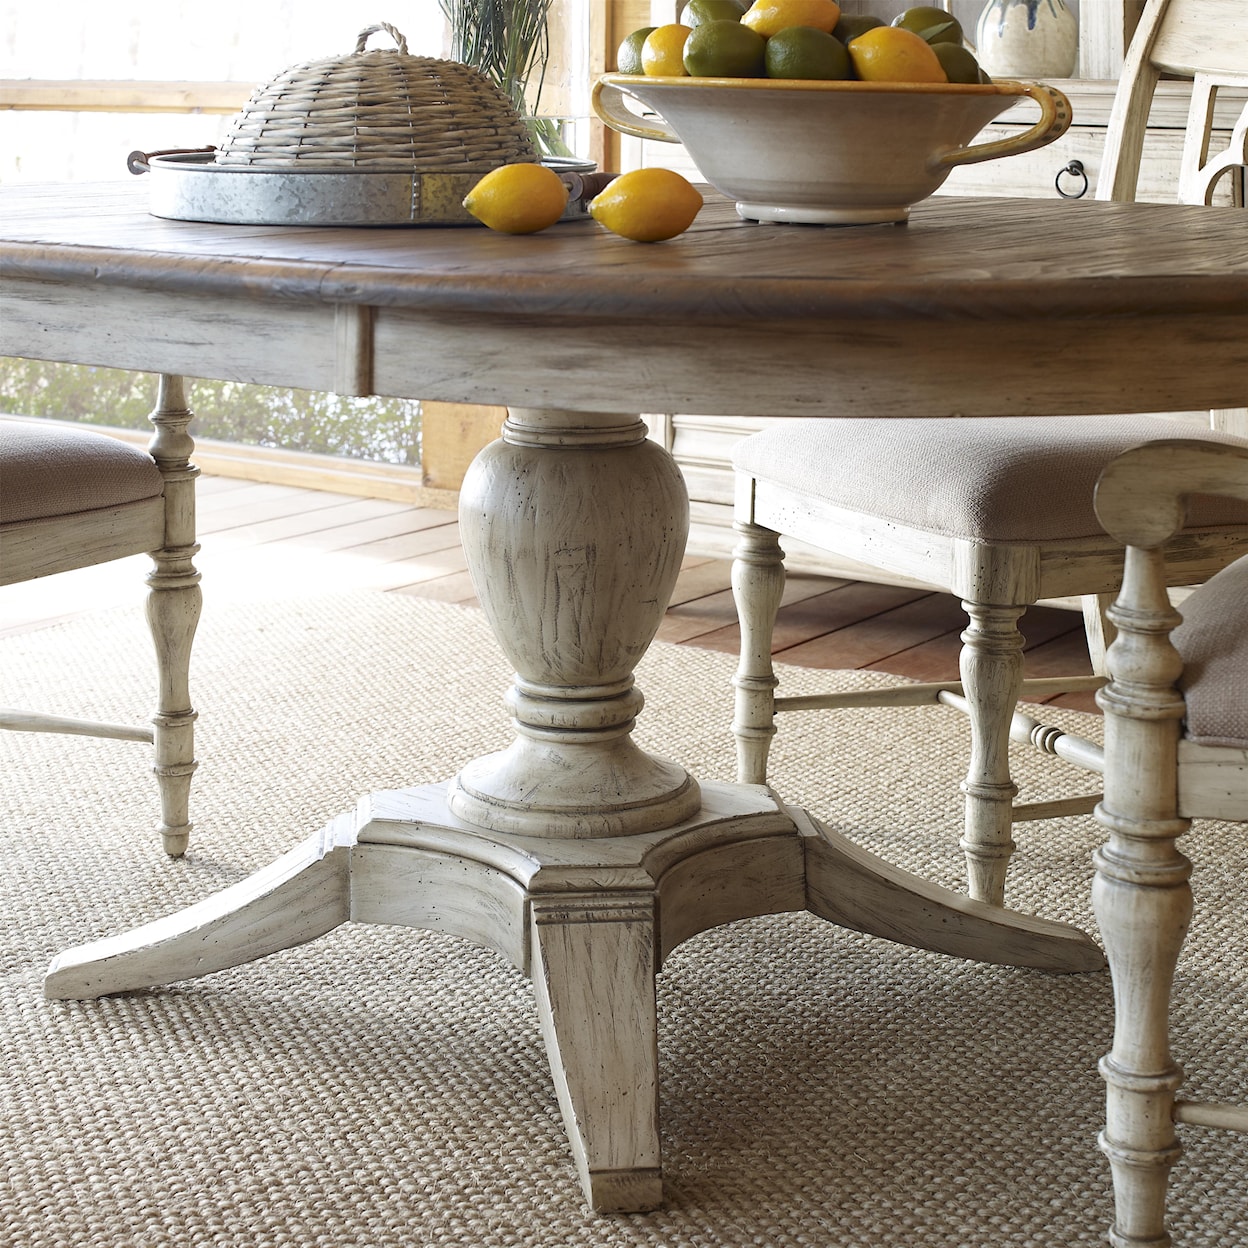 Kincaid Furniture Weatherford Round Dining Table